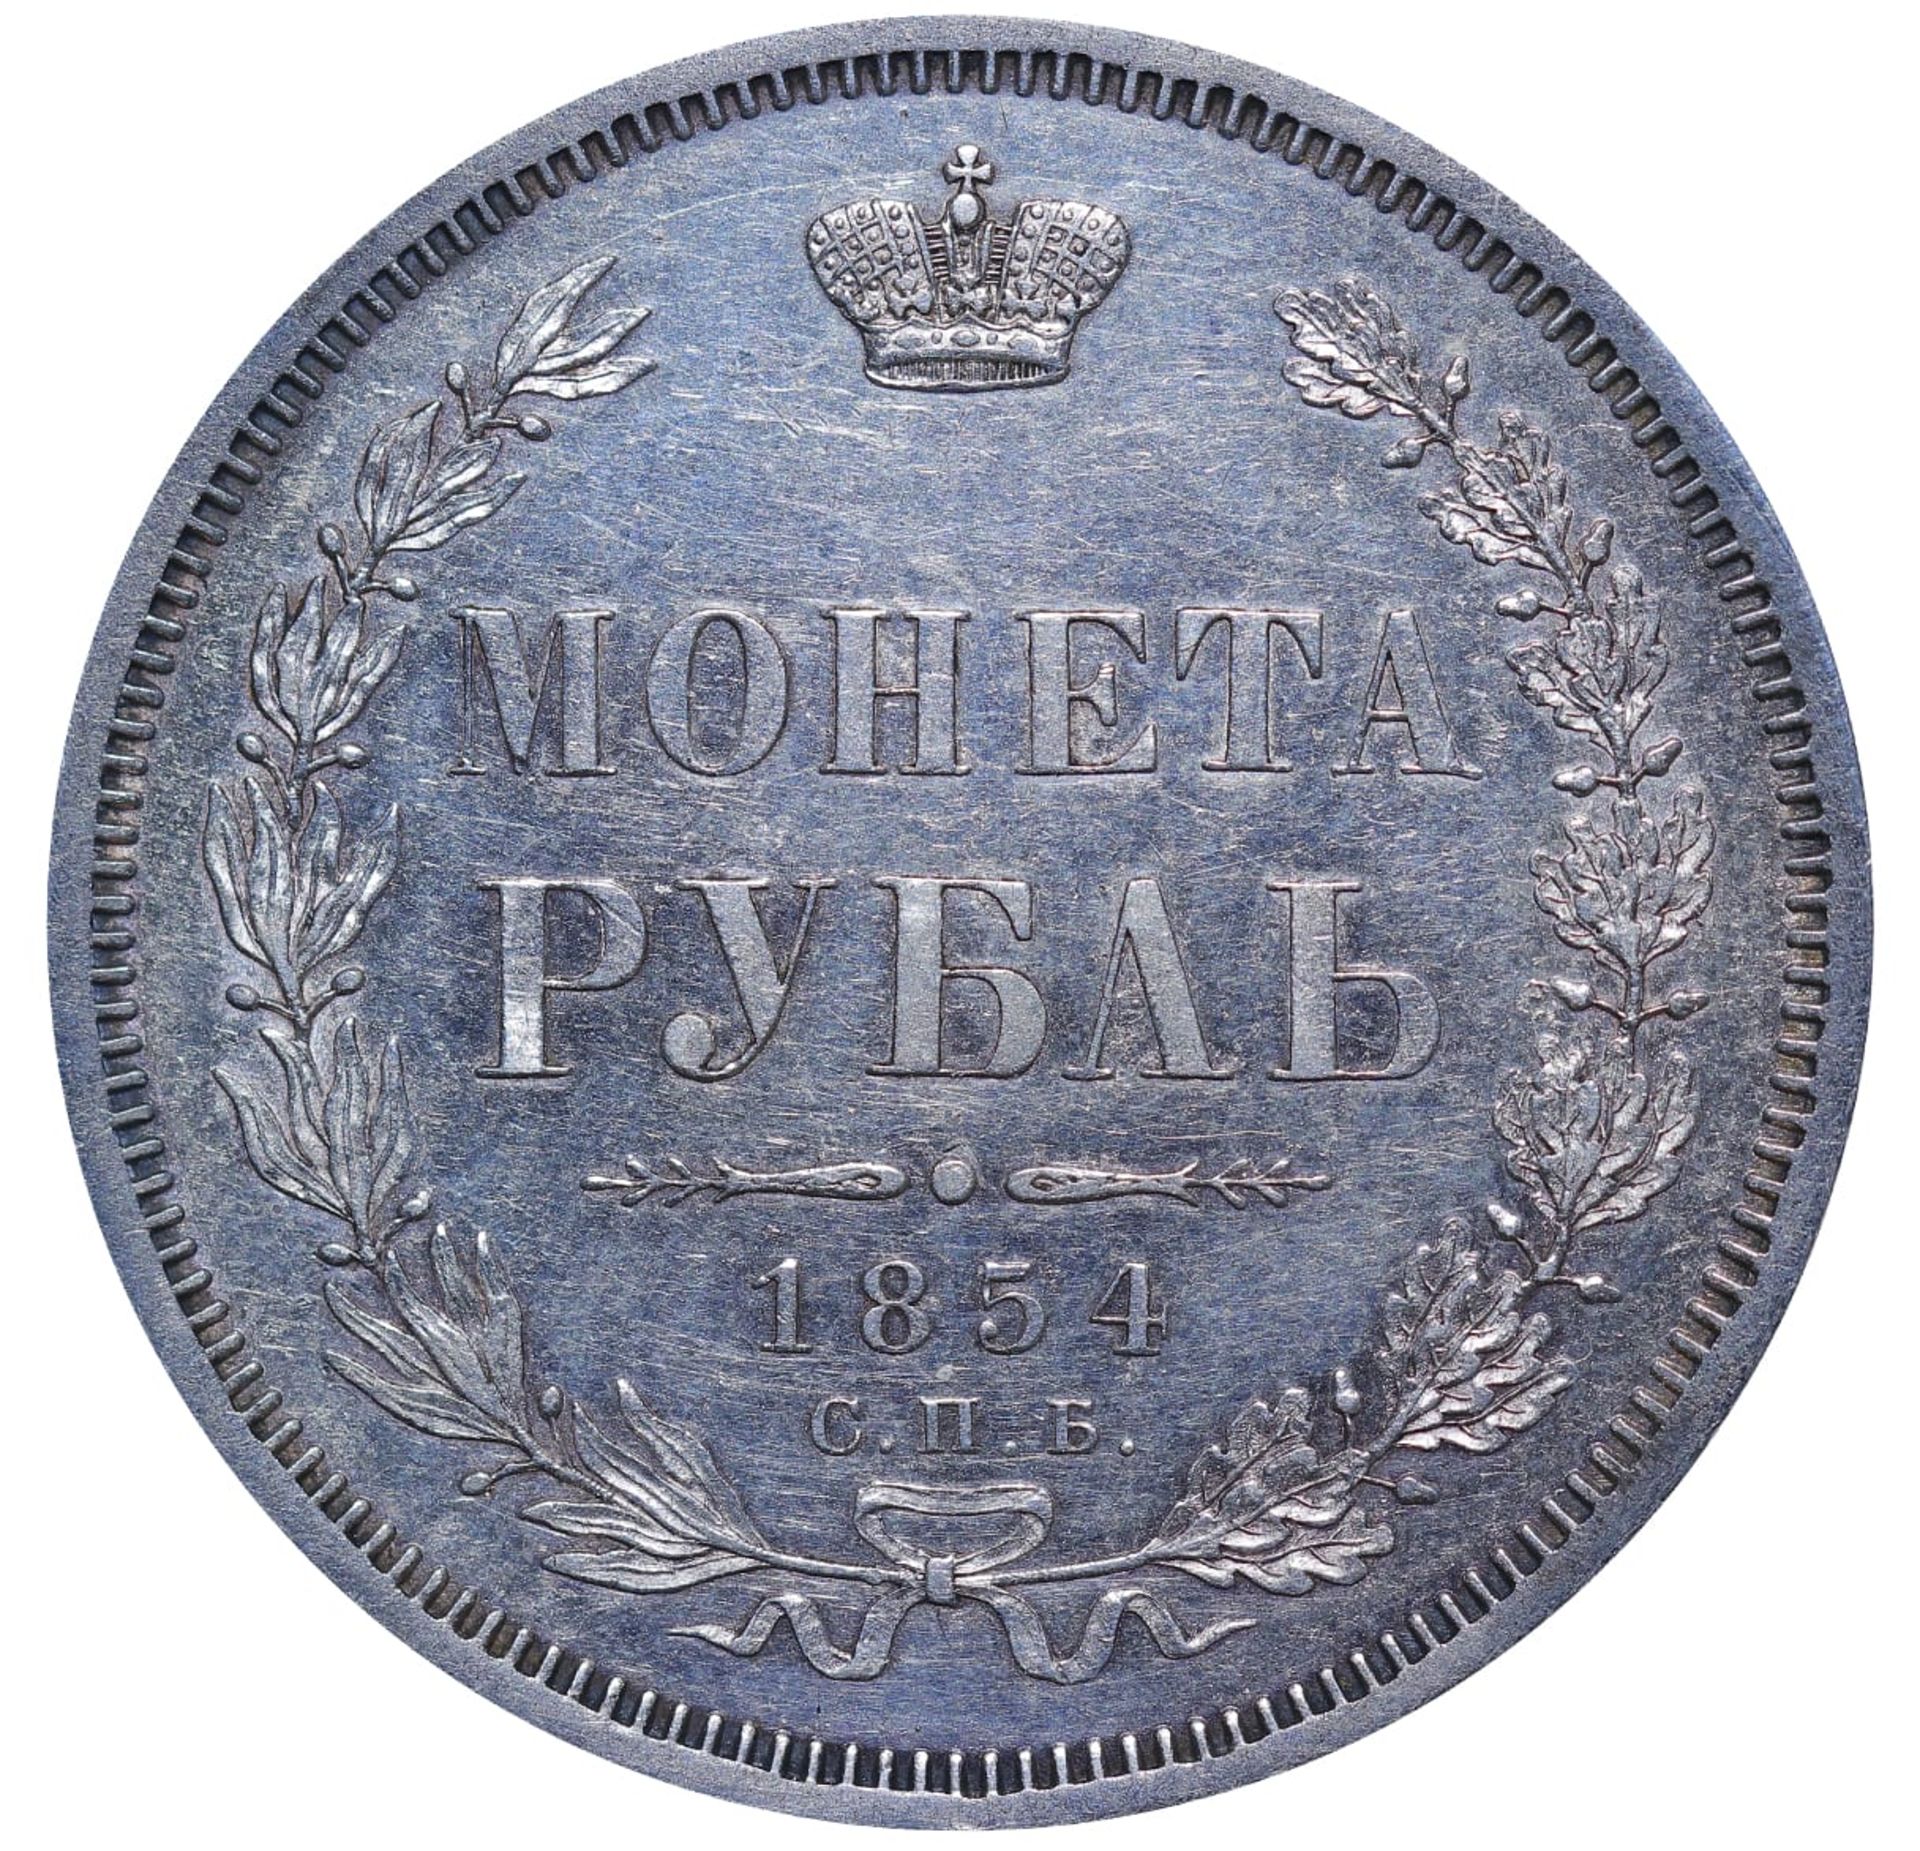 Russian Empire, 1 Rouble, 1854 year, SPB-HI - Image 2 of 3